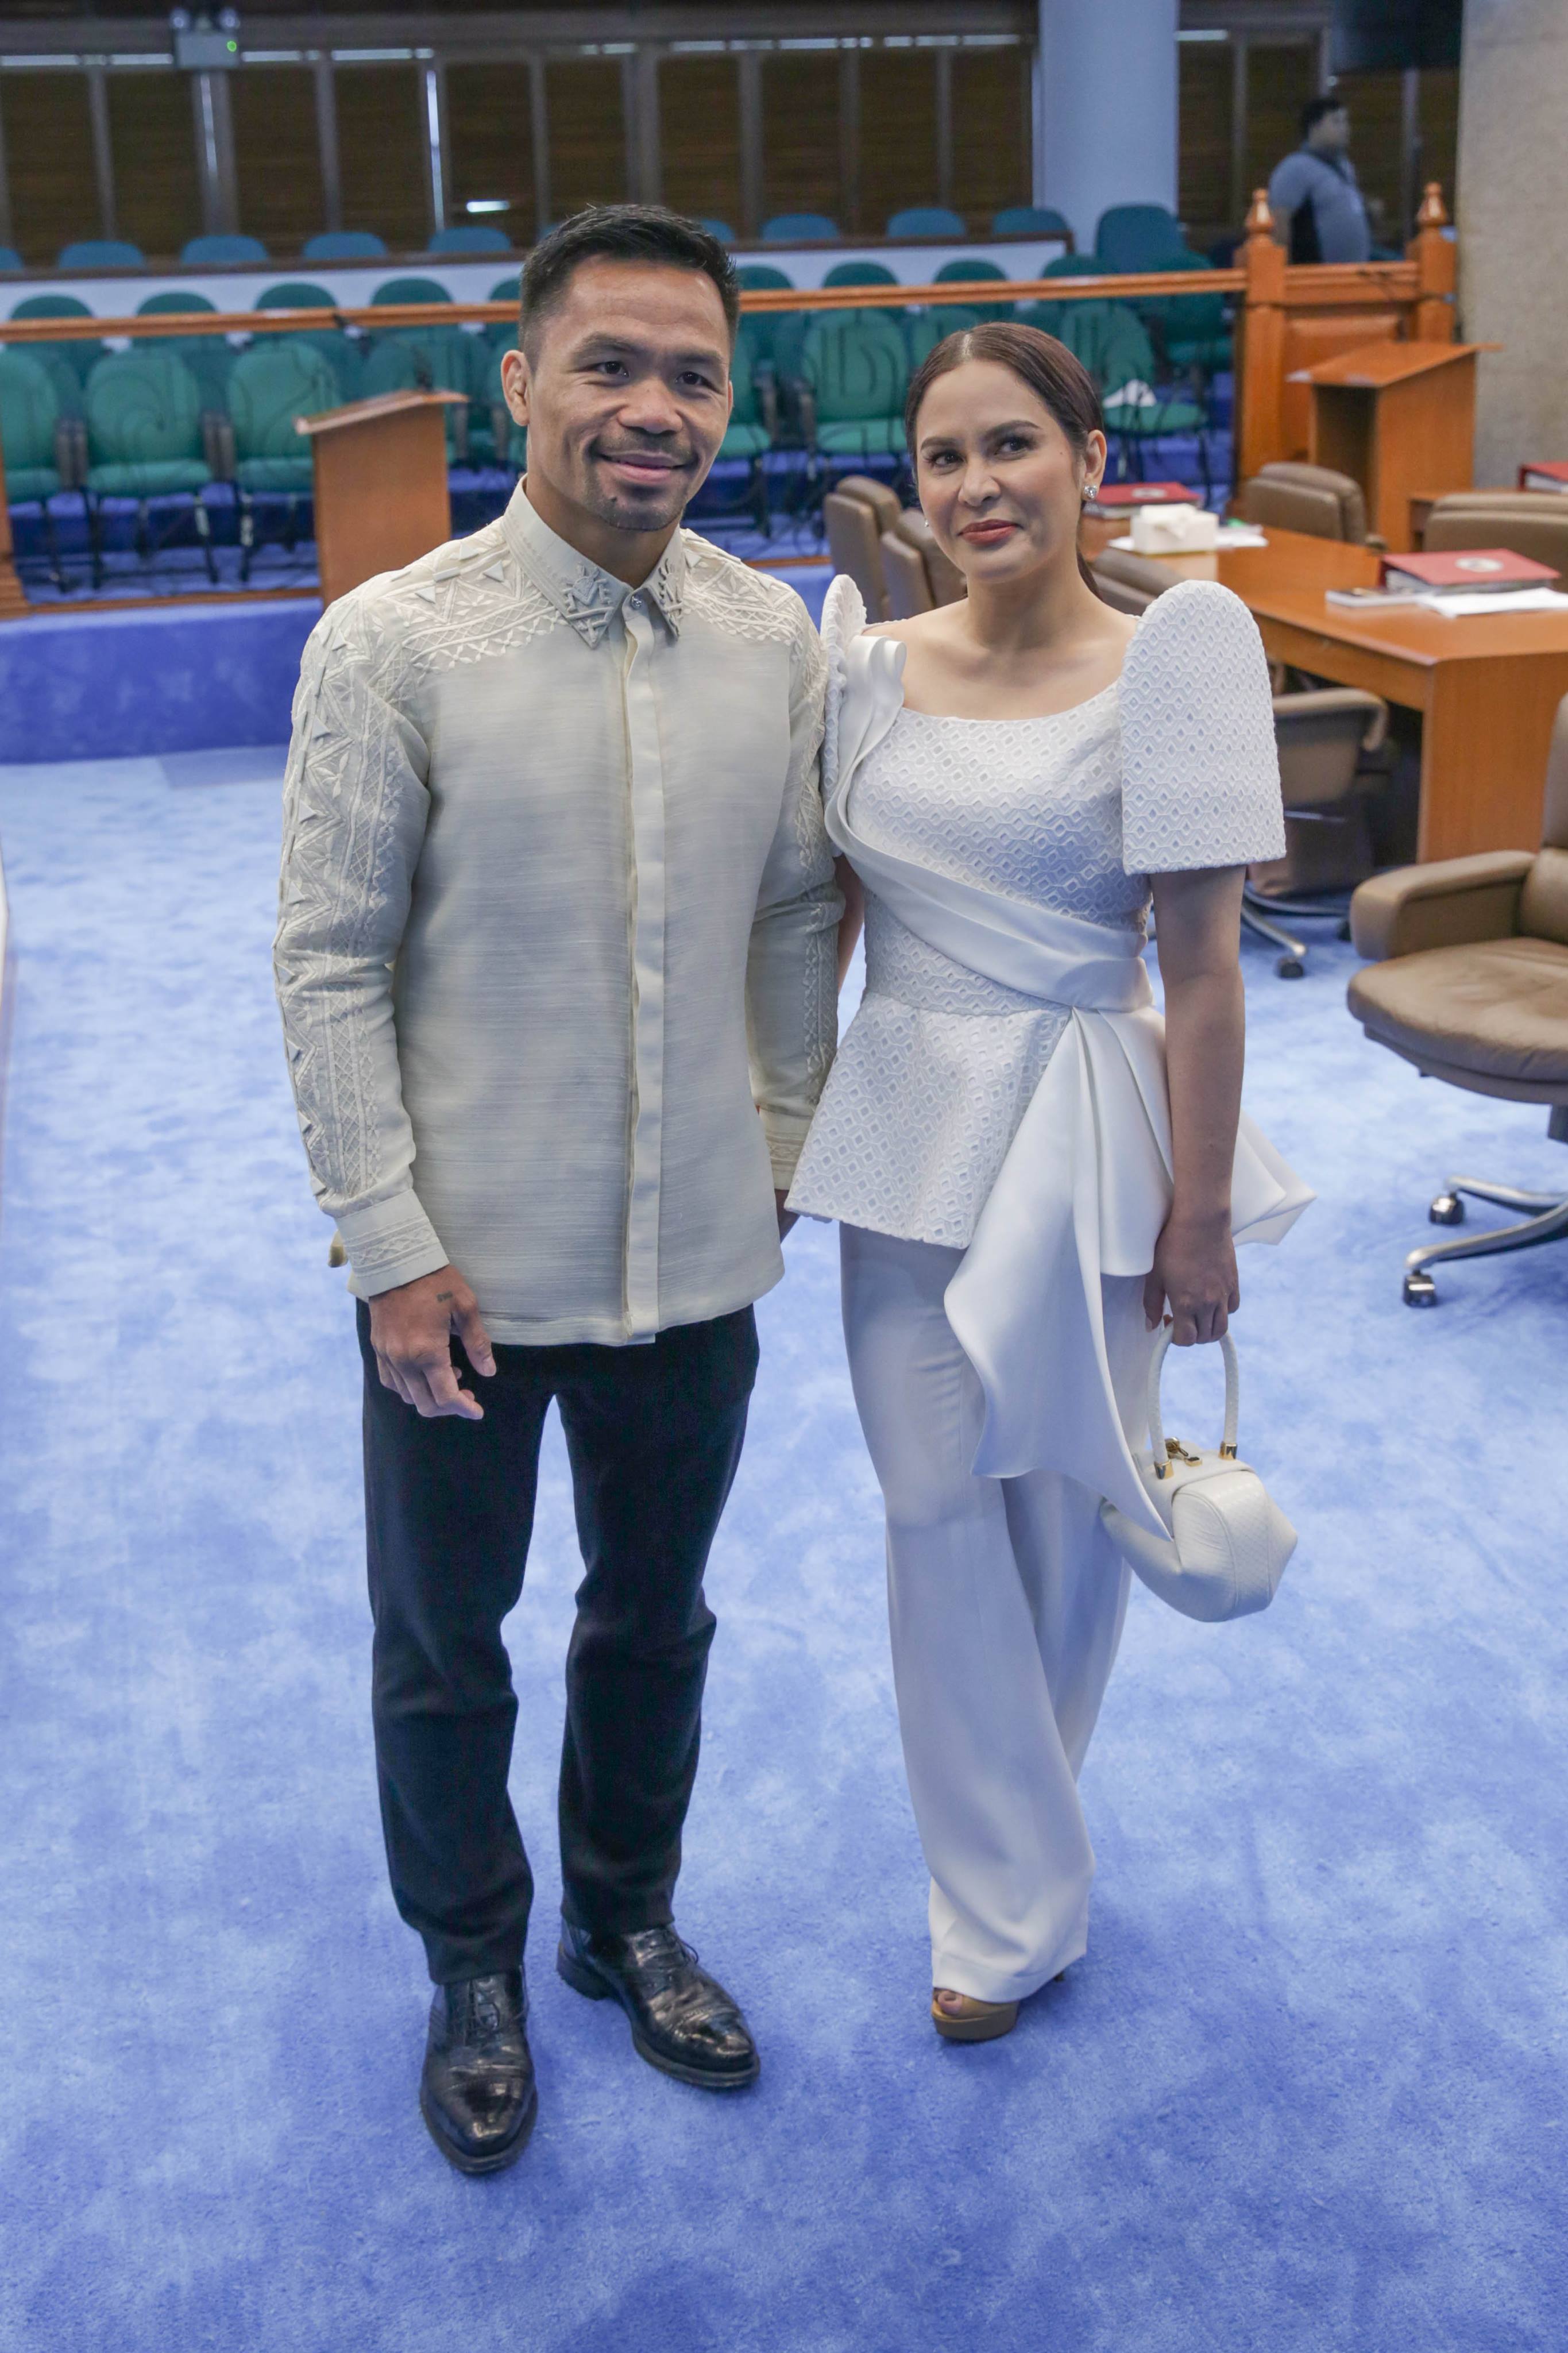 PEPalerts on Instagram: PEP.ph (Philippine Entertainment Portal) tracks Jinkee  Pacquiao's style transformation against the backdrop of her husband Senator  Manny Pacquiao's matches since 2015